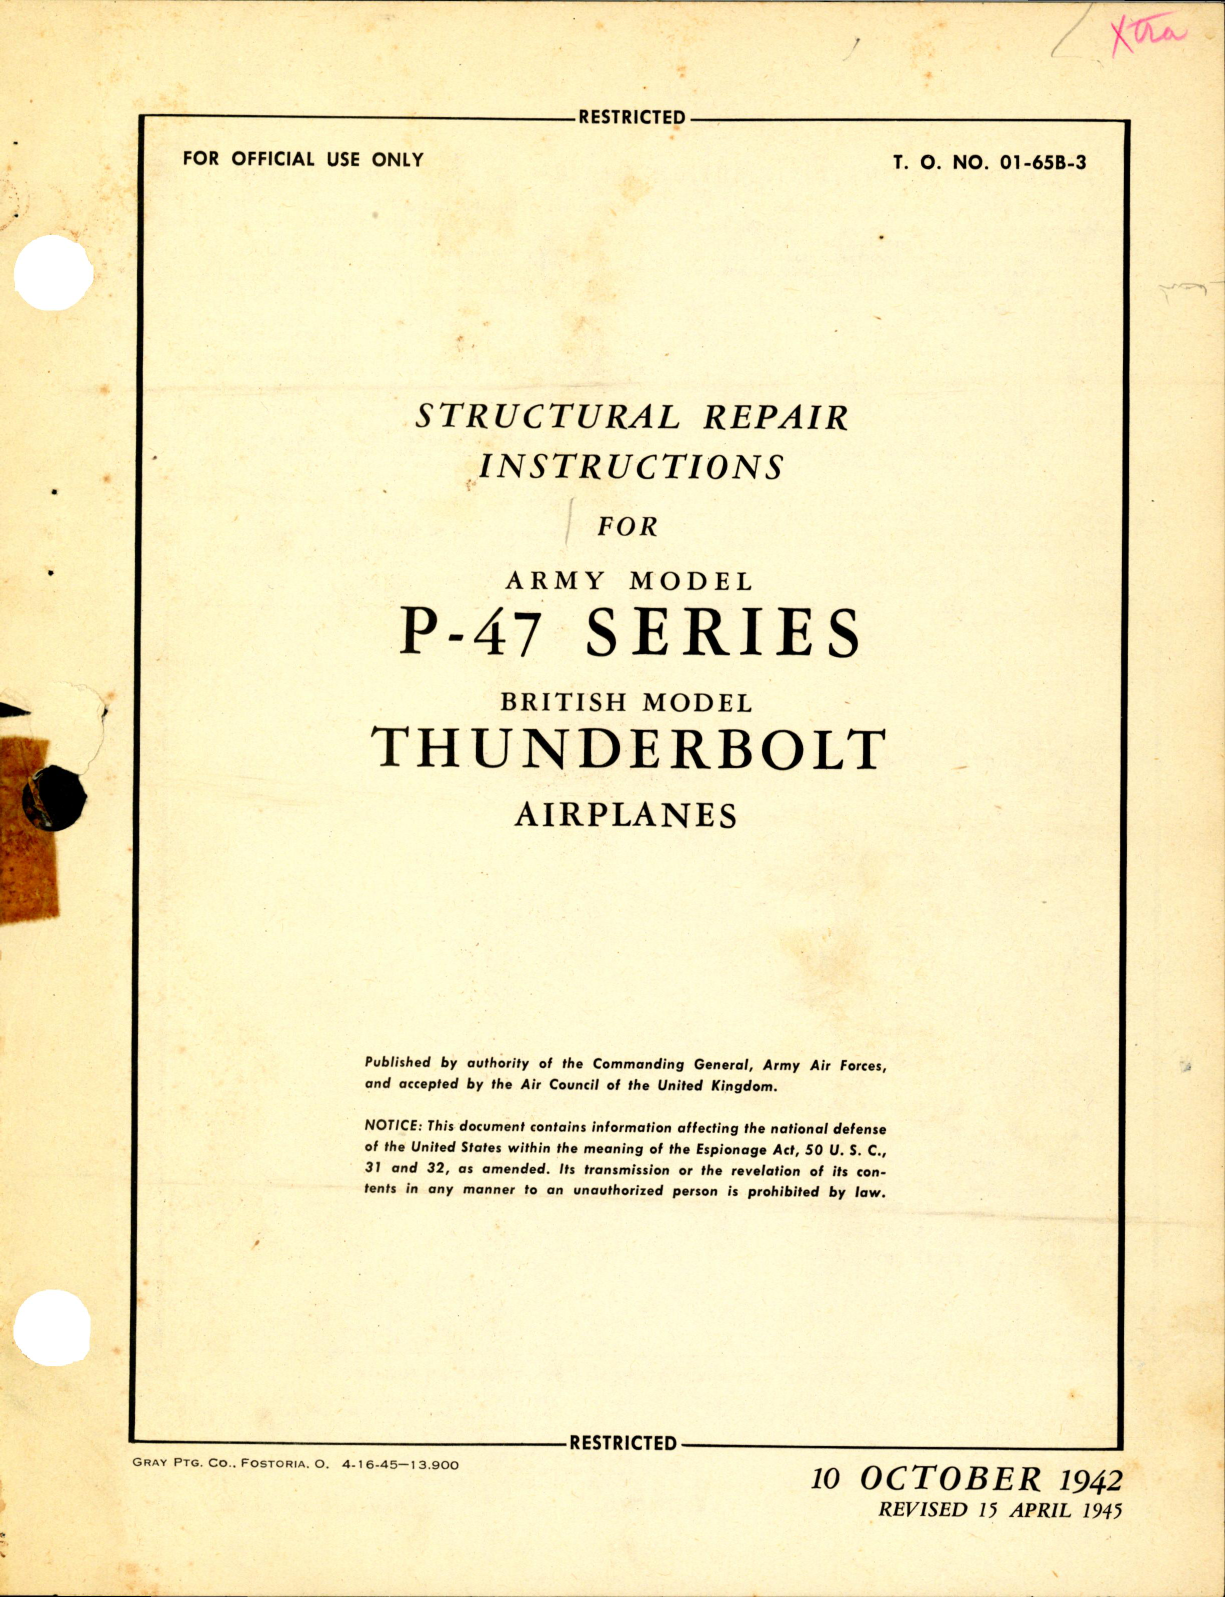 Sample page 1 from AirCorps Library document: Structural Repair Instructions for P-47 Series